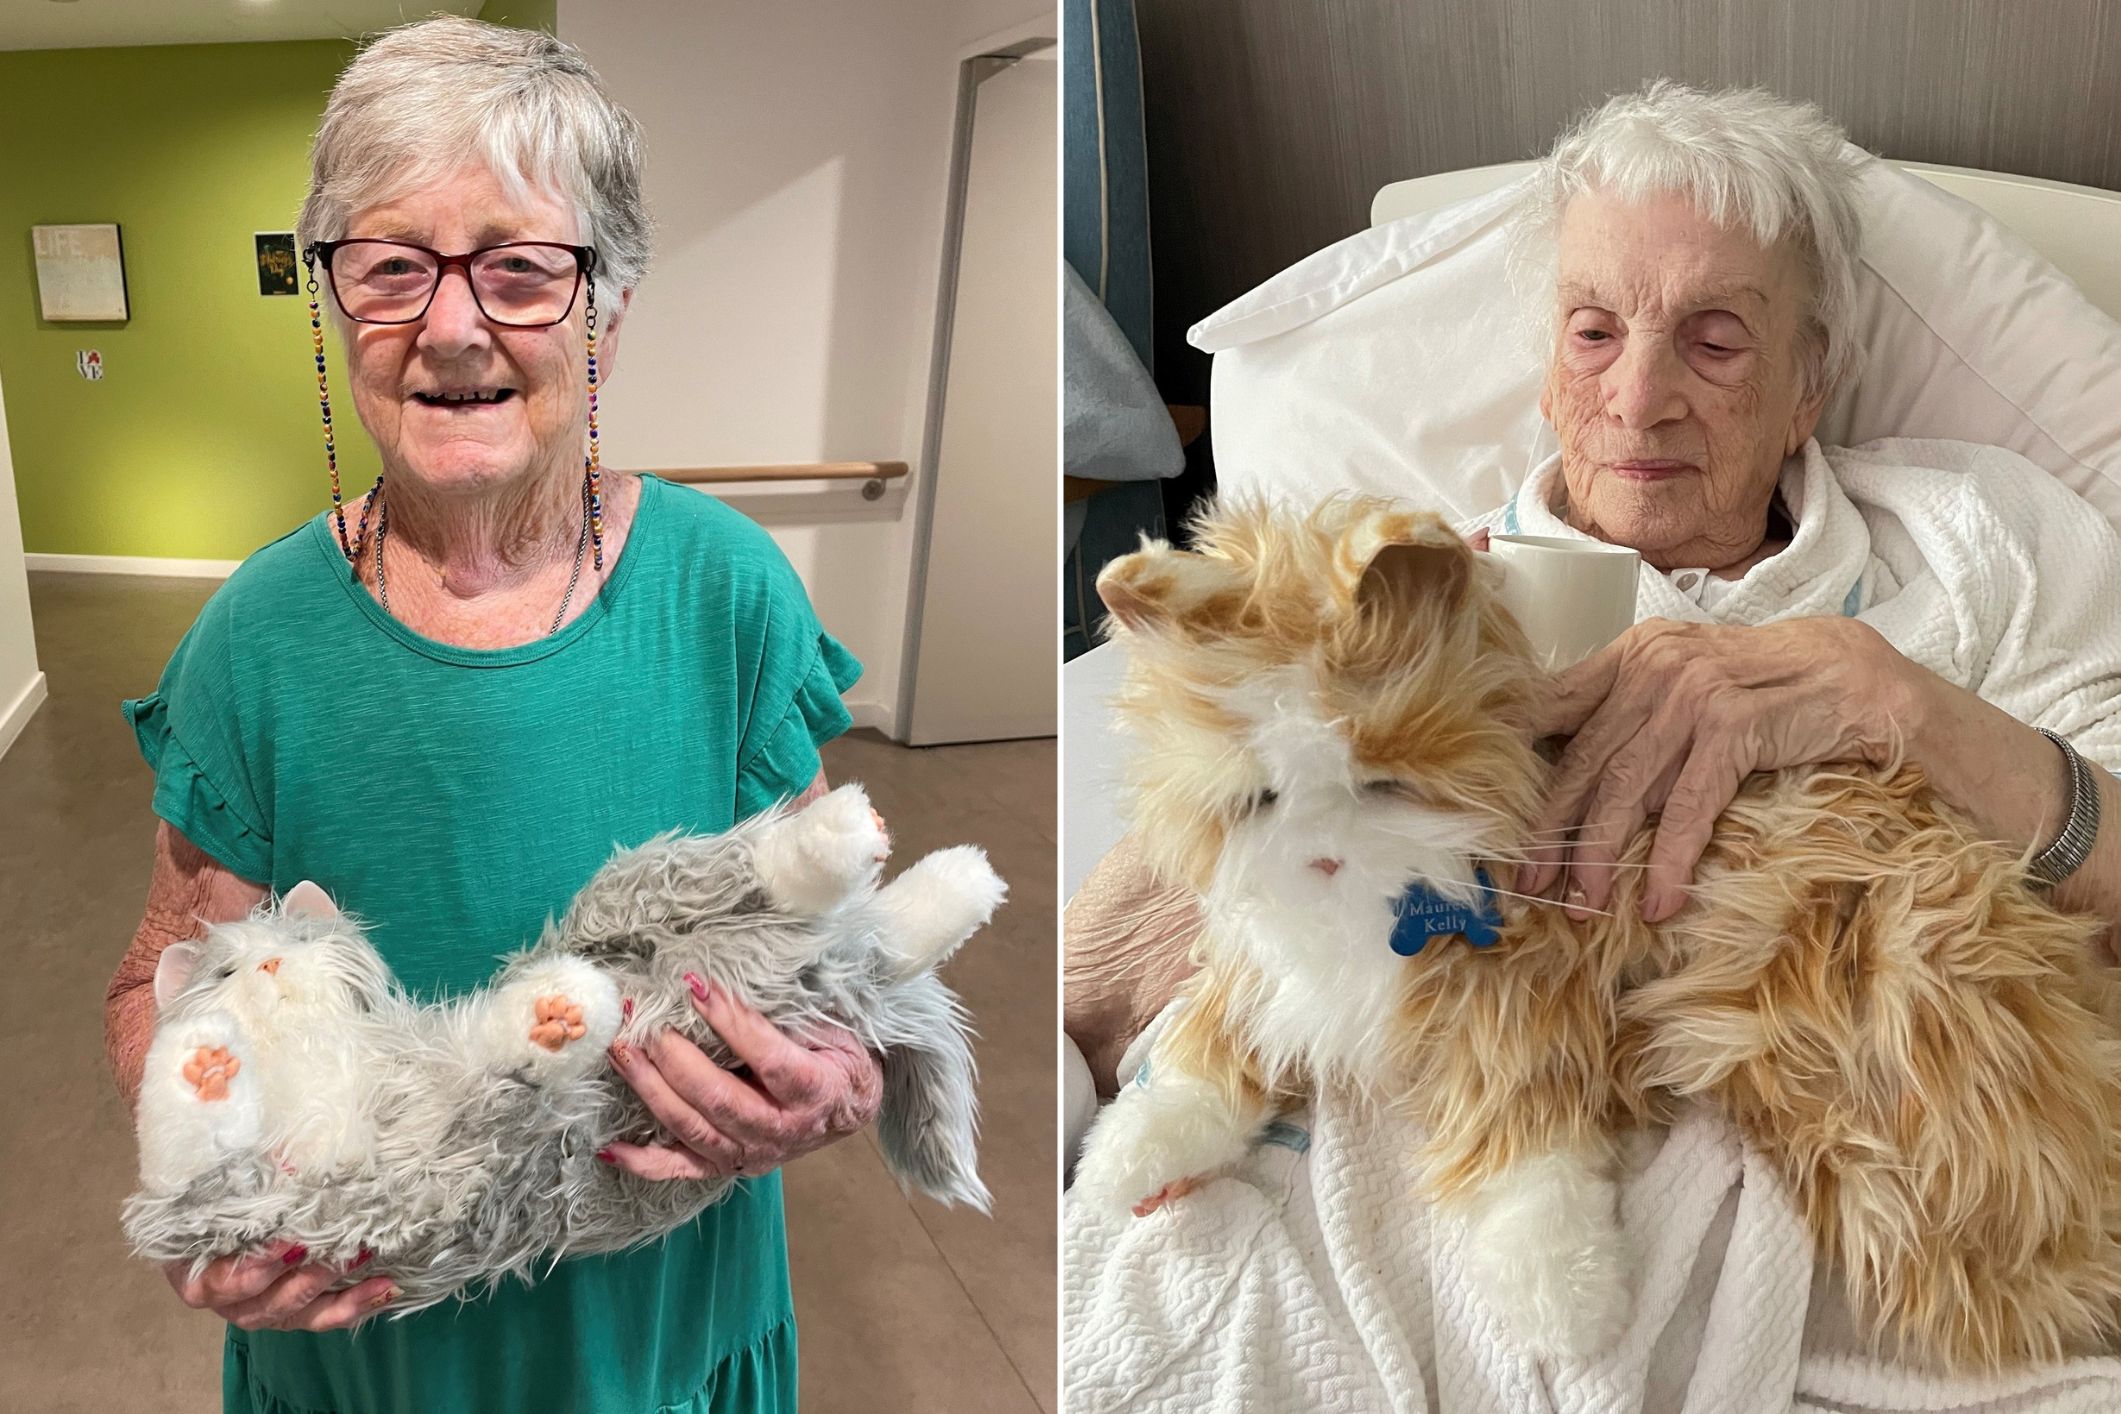 Robotic pets give elderly residents a reason to smile